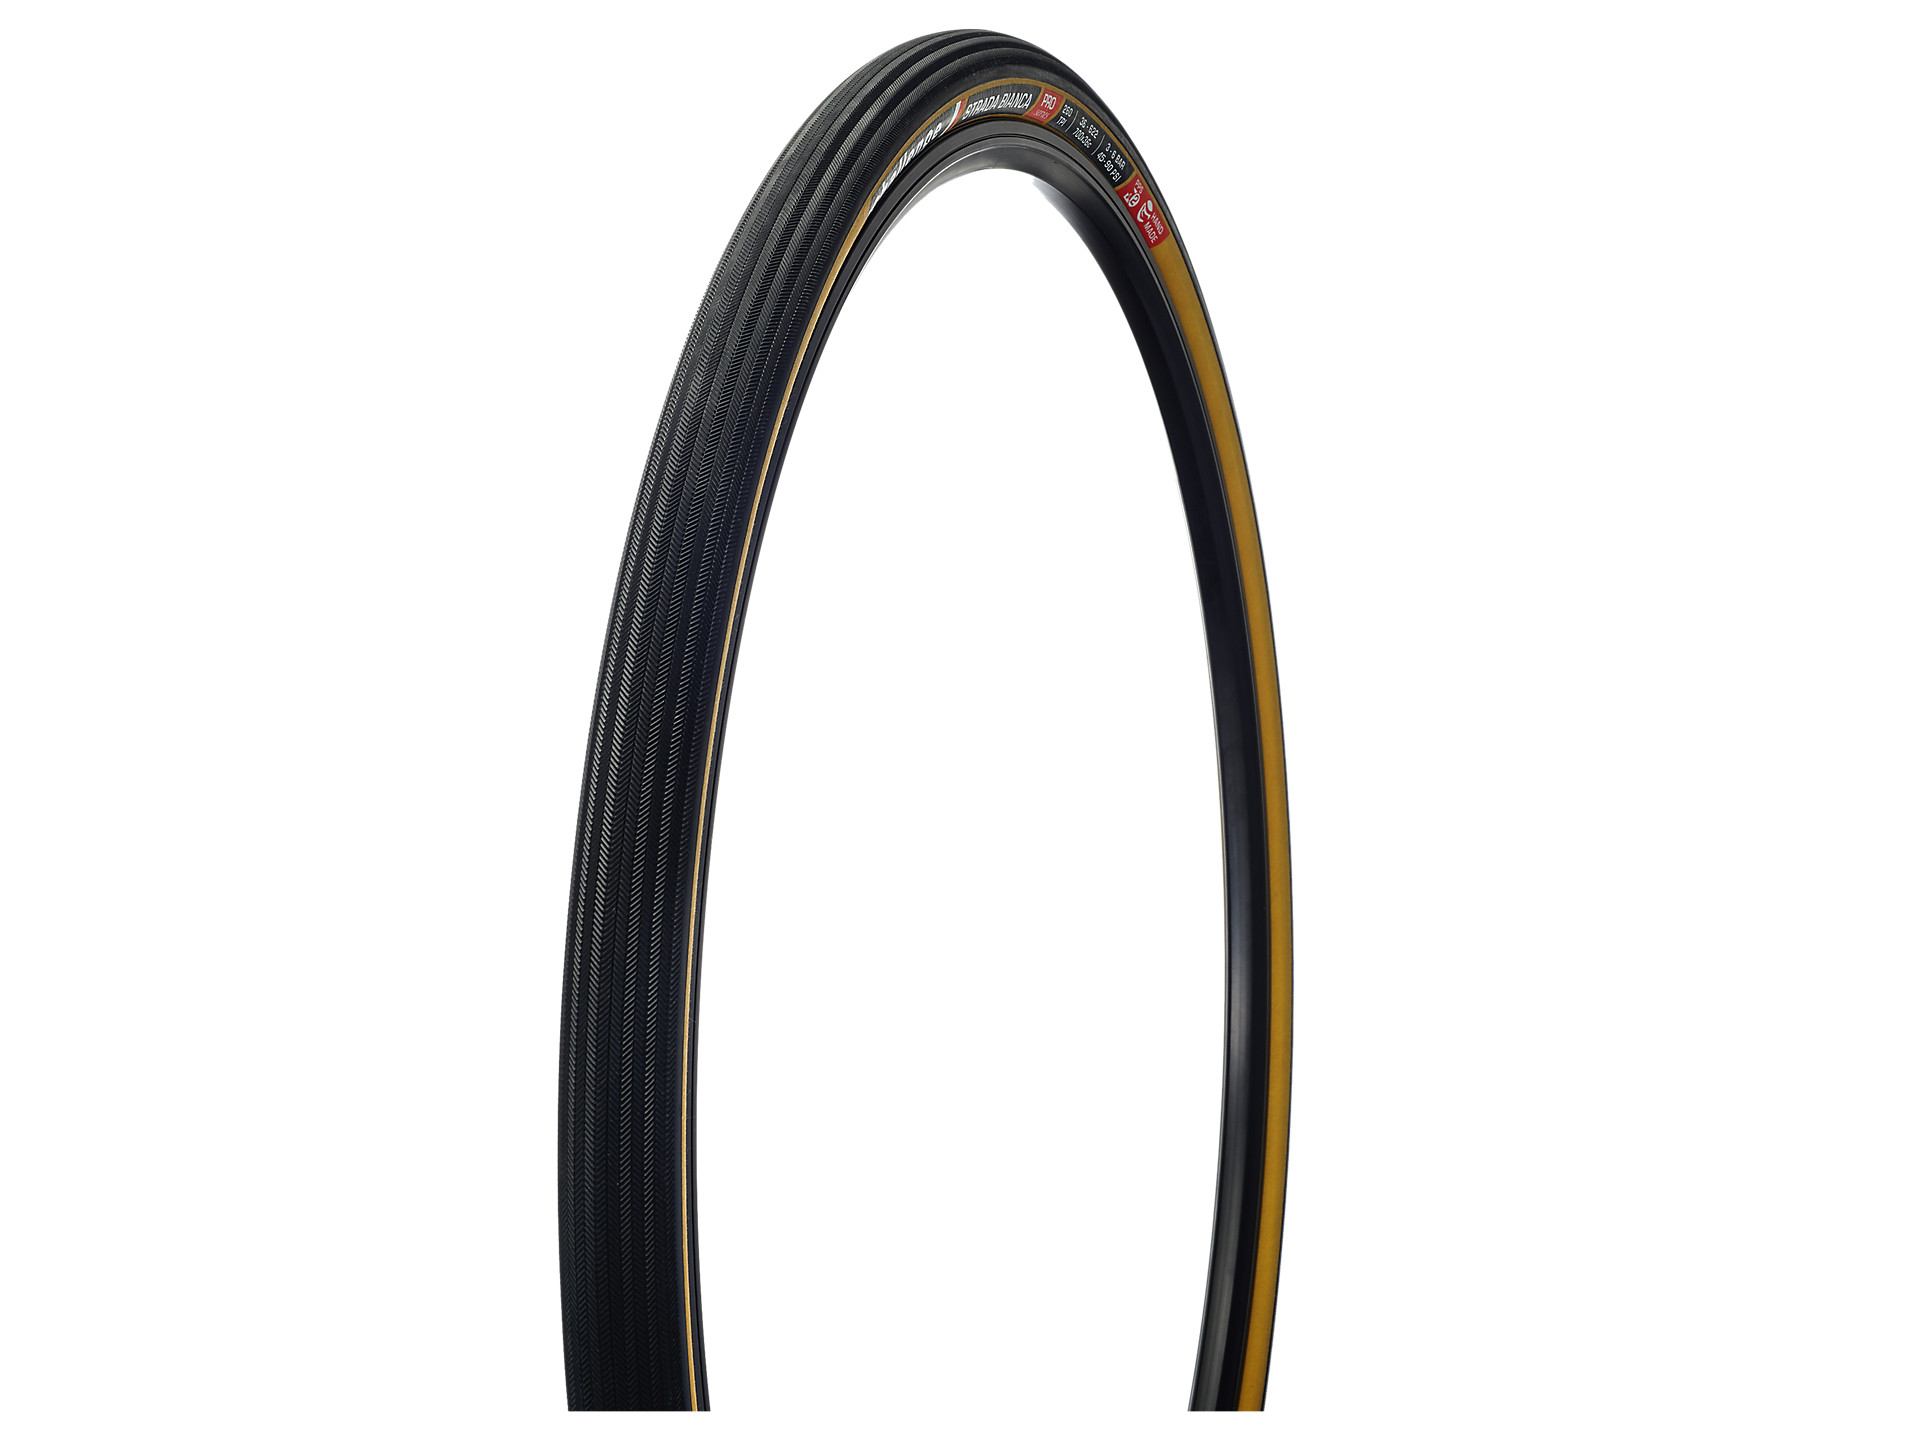 Challenge Limus 33 Pro Series Clincher Cyclocross Tire 700x33c Gravel NOS Fw206 for sale online 